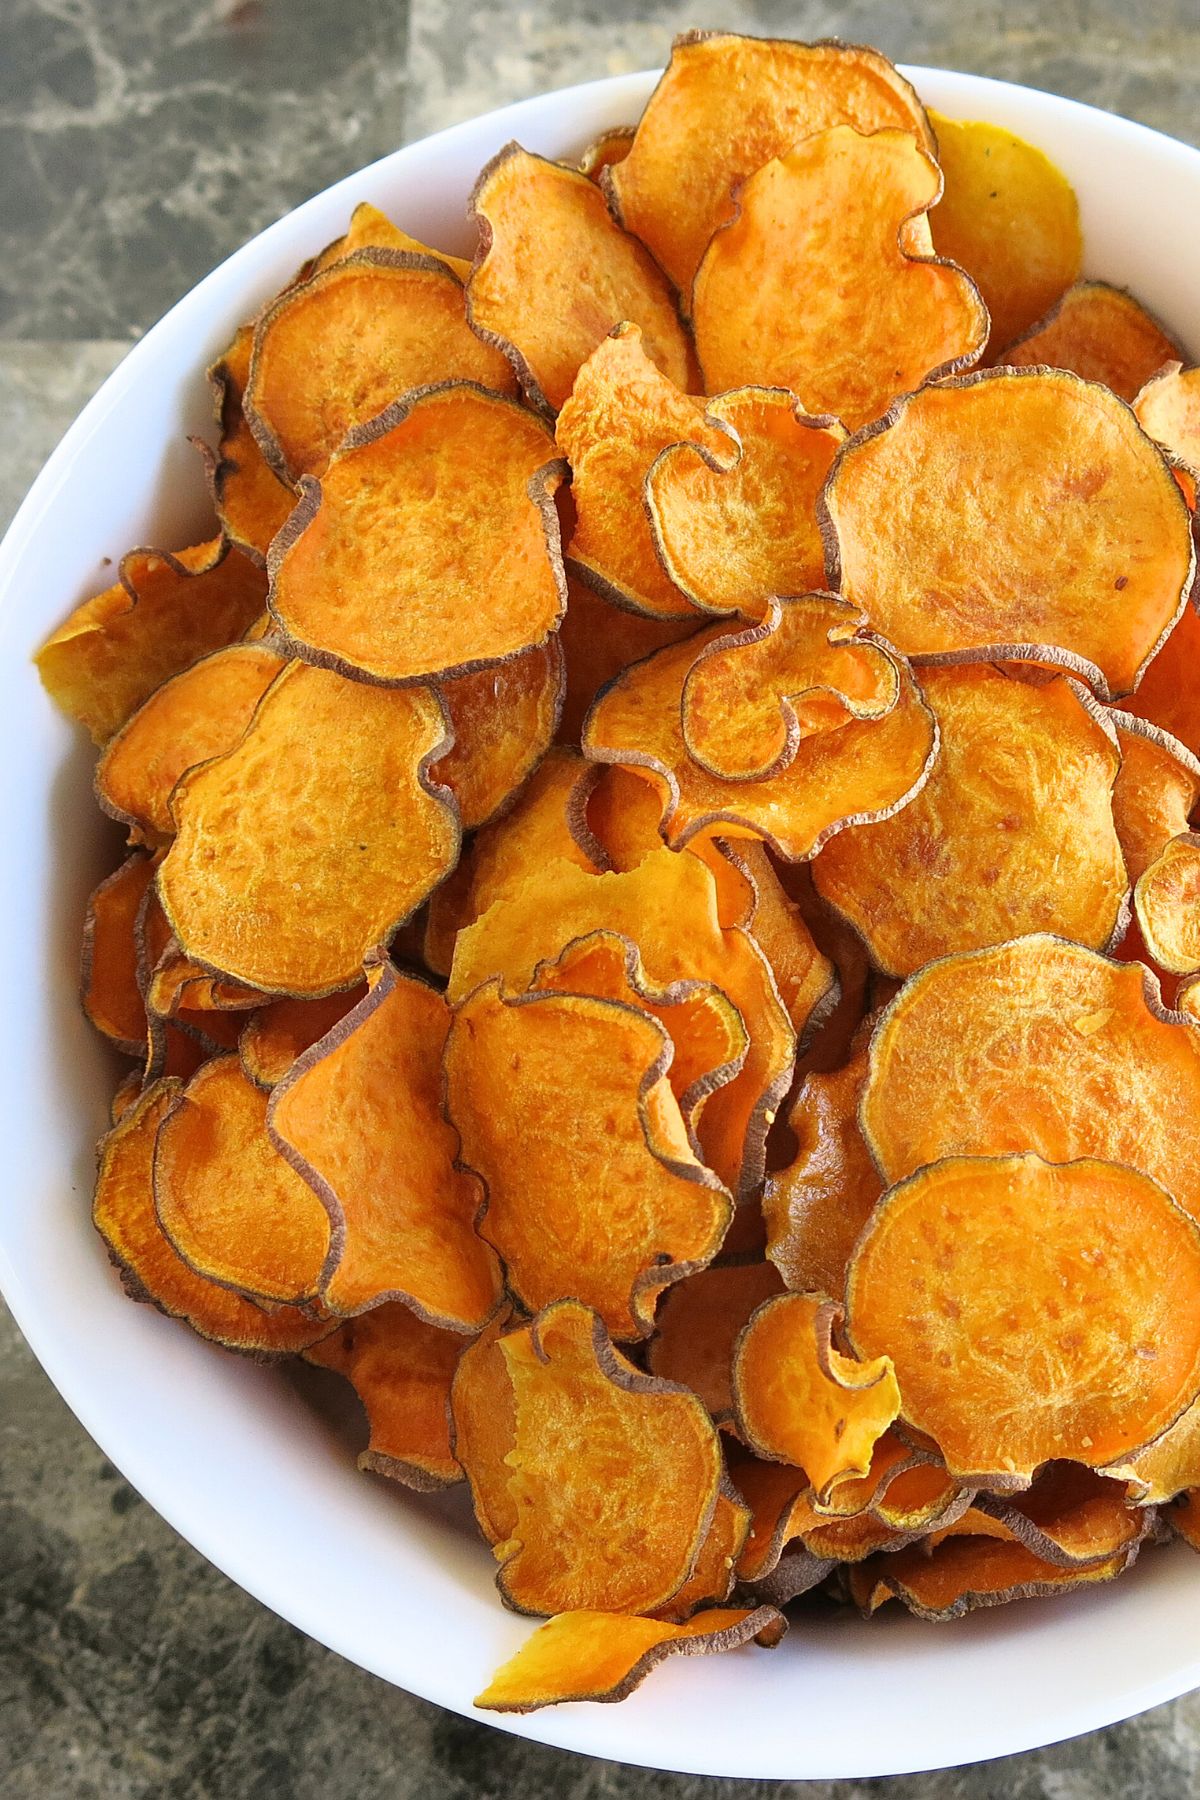 Large white bowl filled with oven-baked sweet potato chips on a marble background.